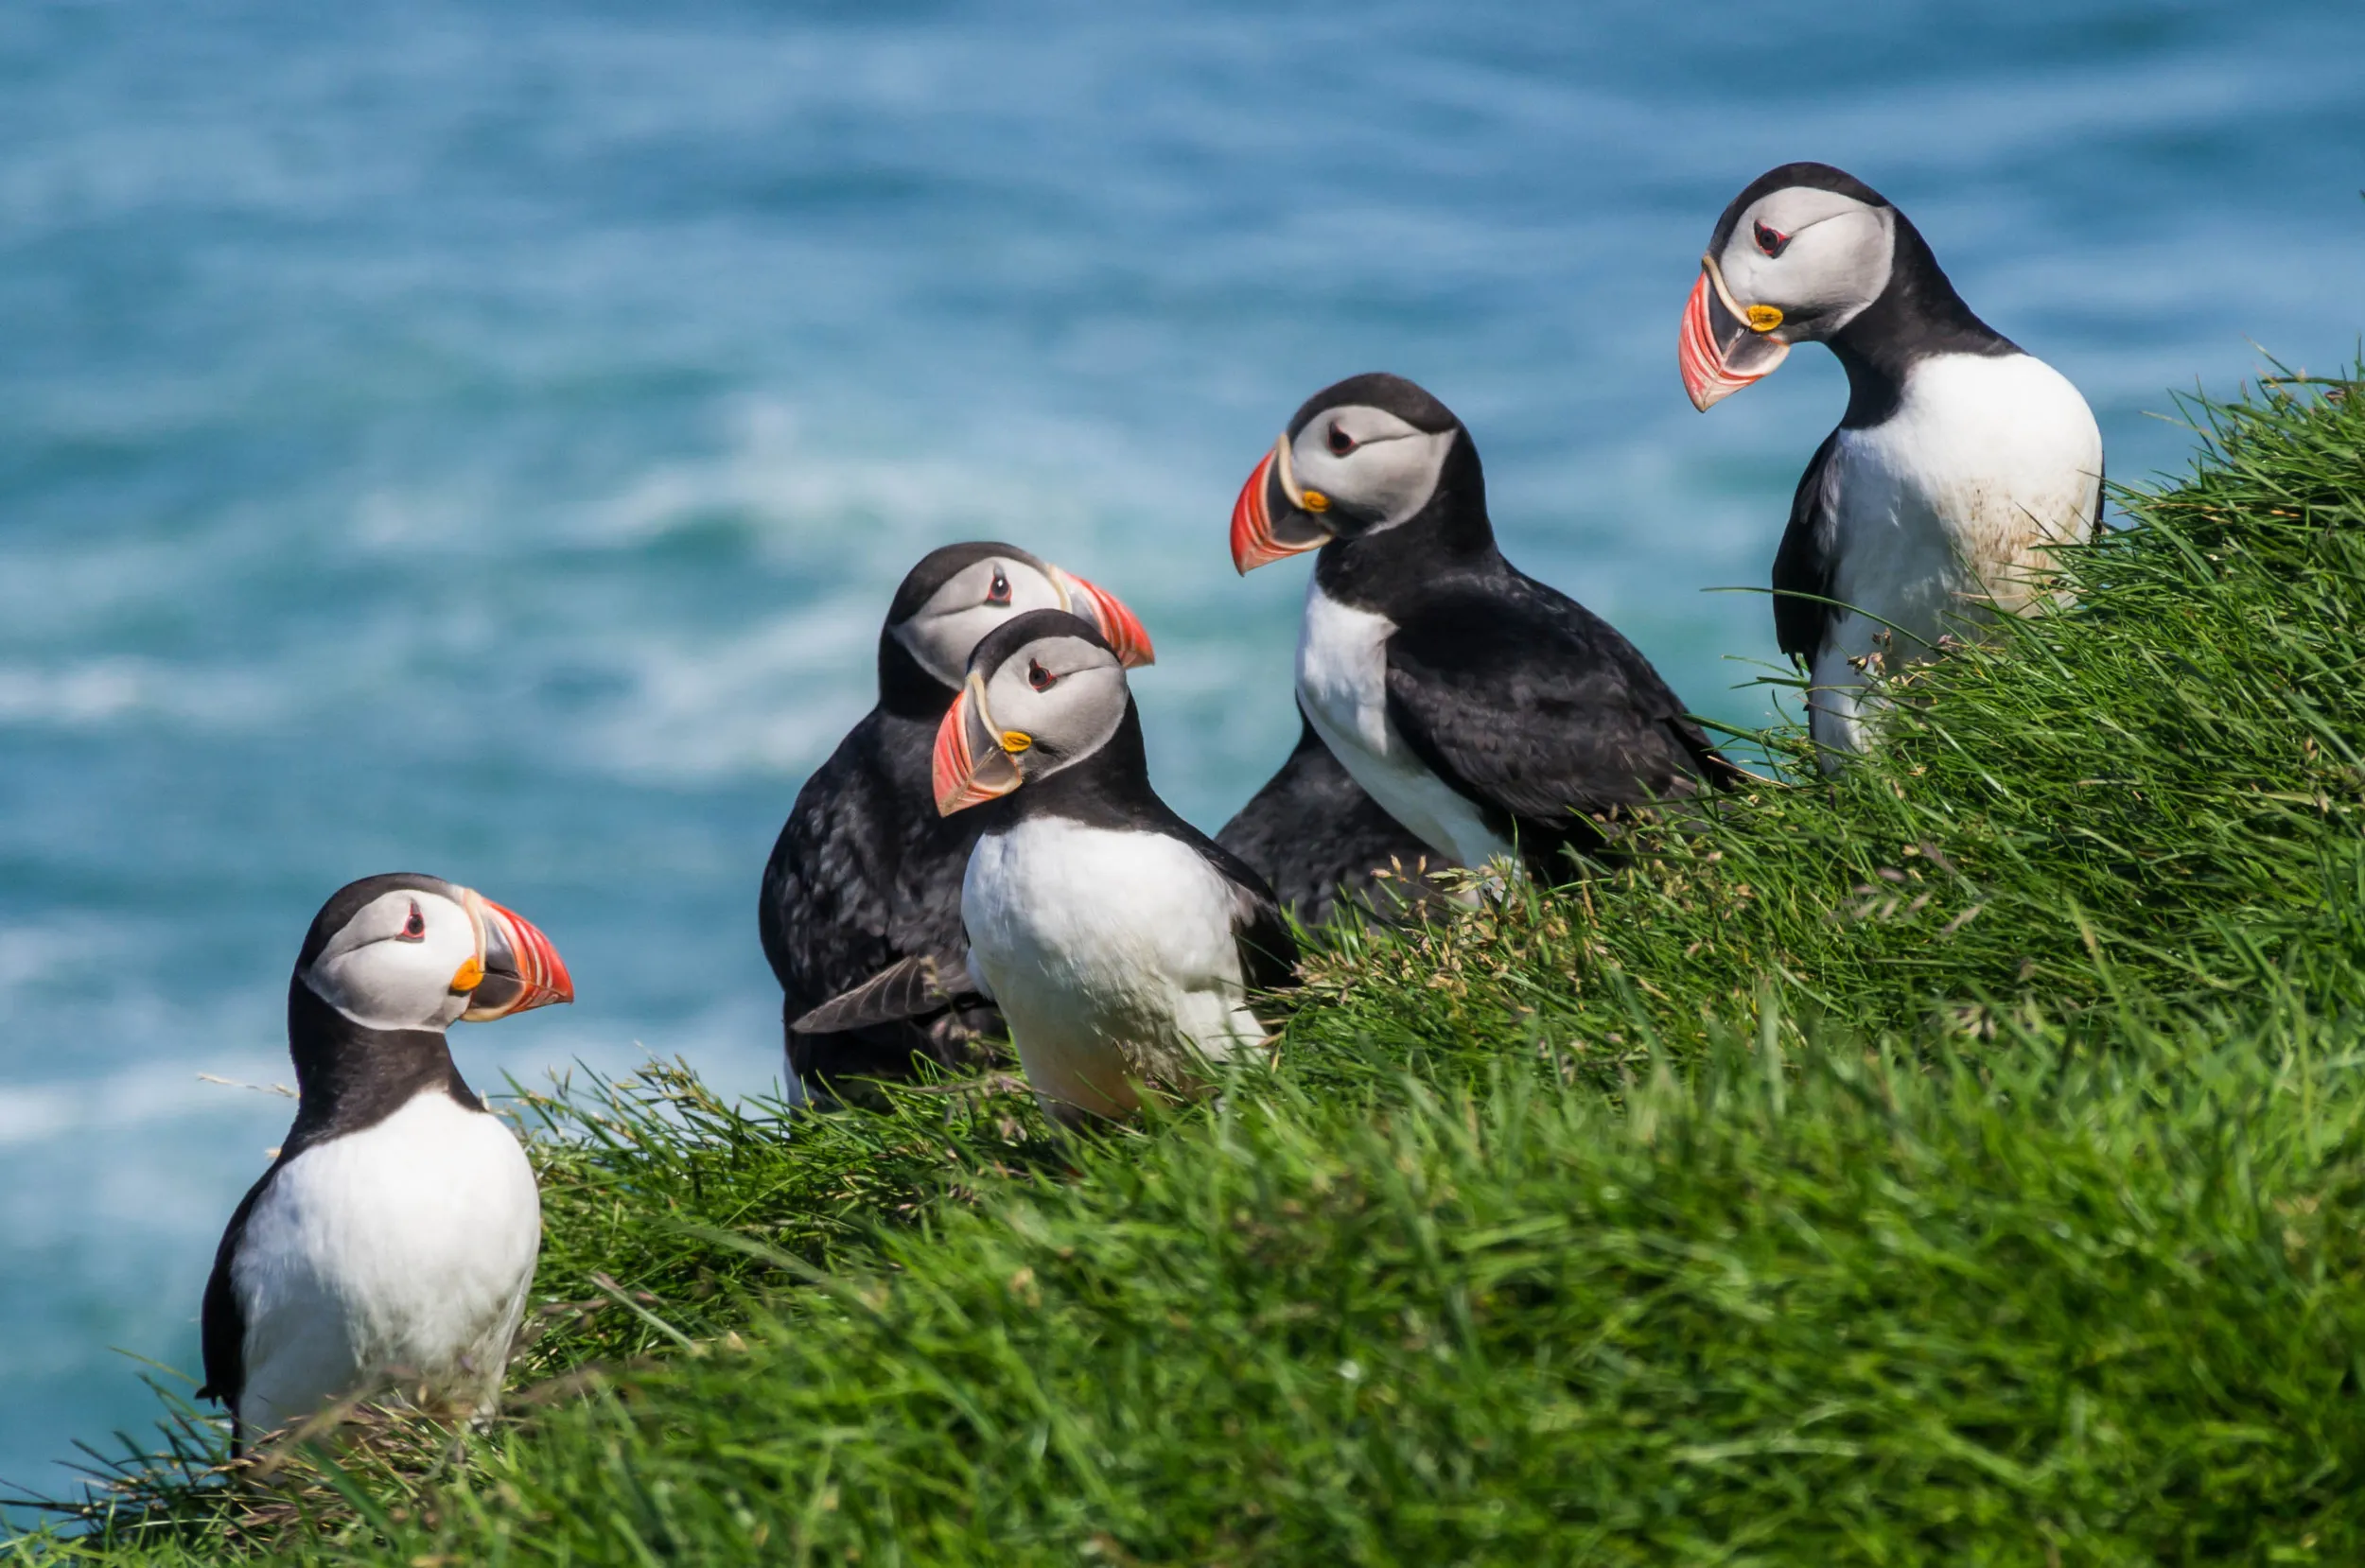 Group of 5 puffins stood on the grassy edge of a cliff, with the ocean in the background.